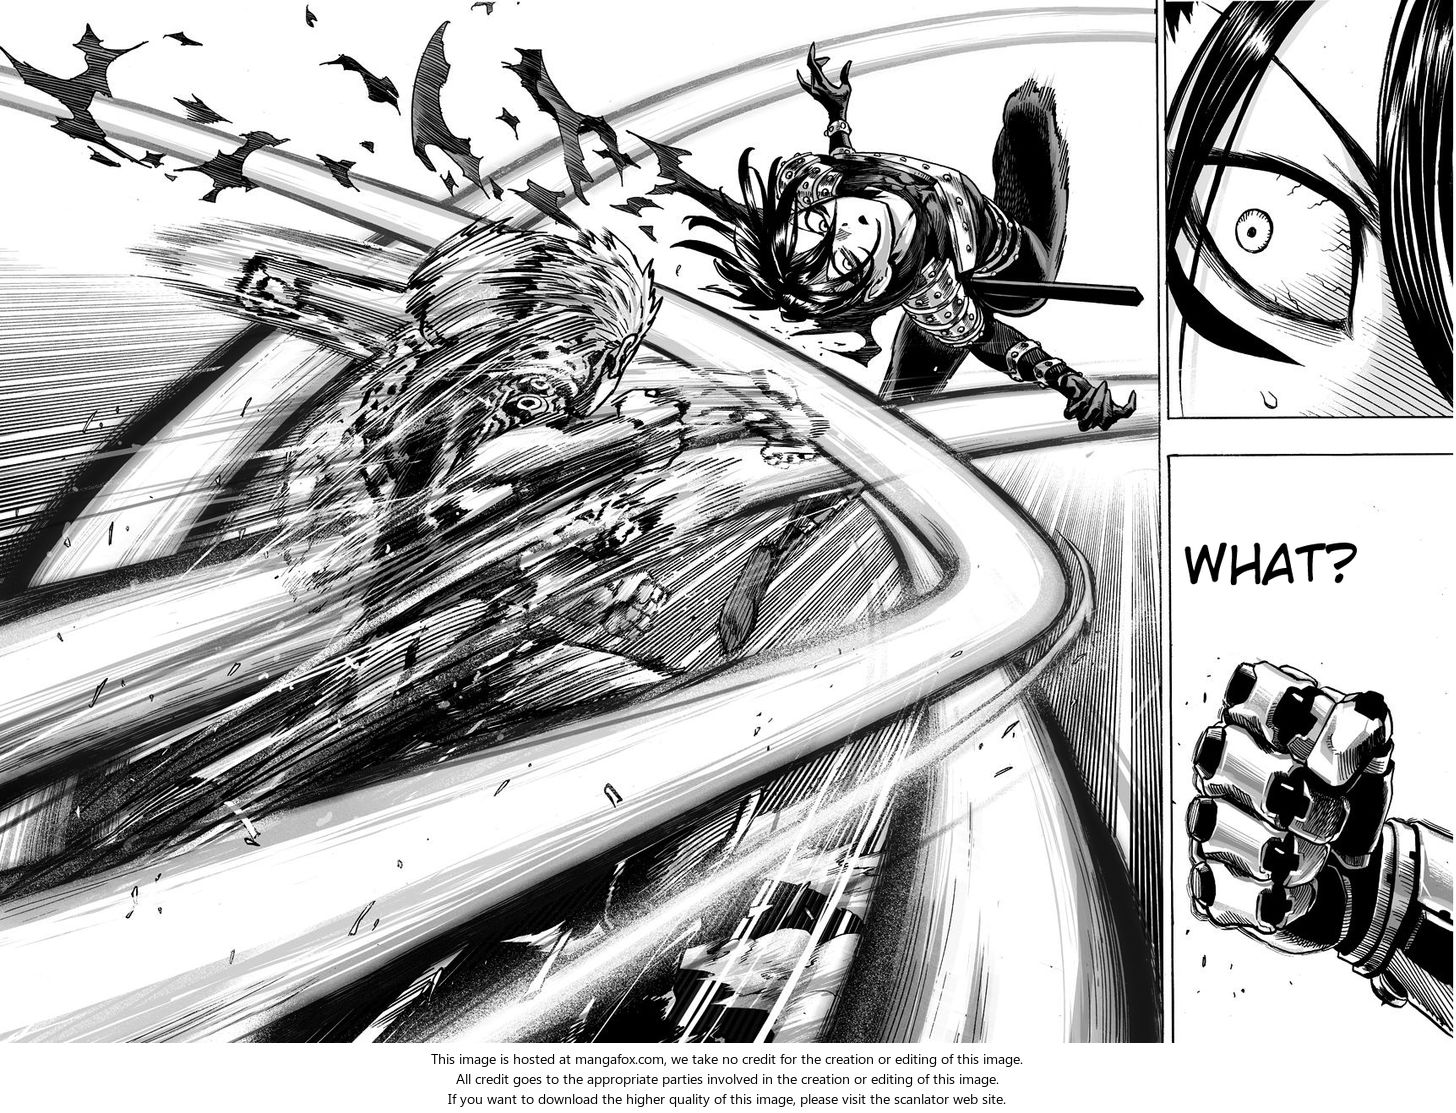 Onepunch-Man Vol.09 Ch.043.1 - 43rd Punch [Accelerate] (1)